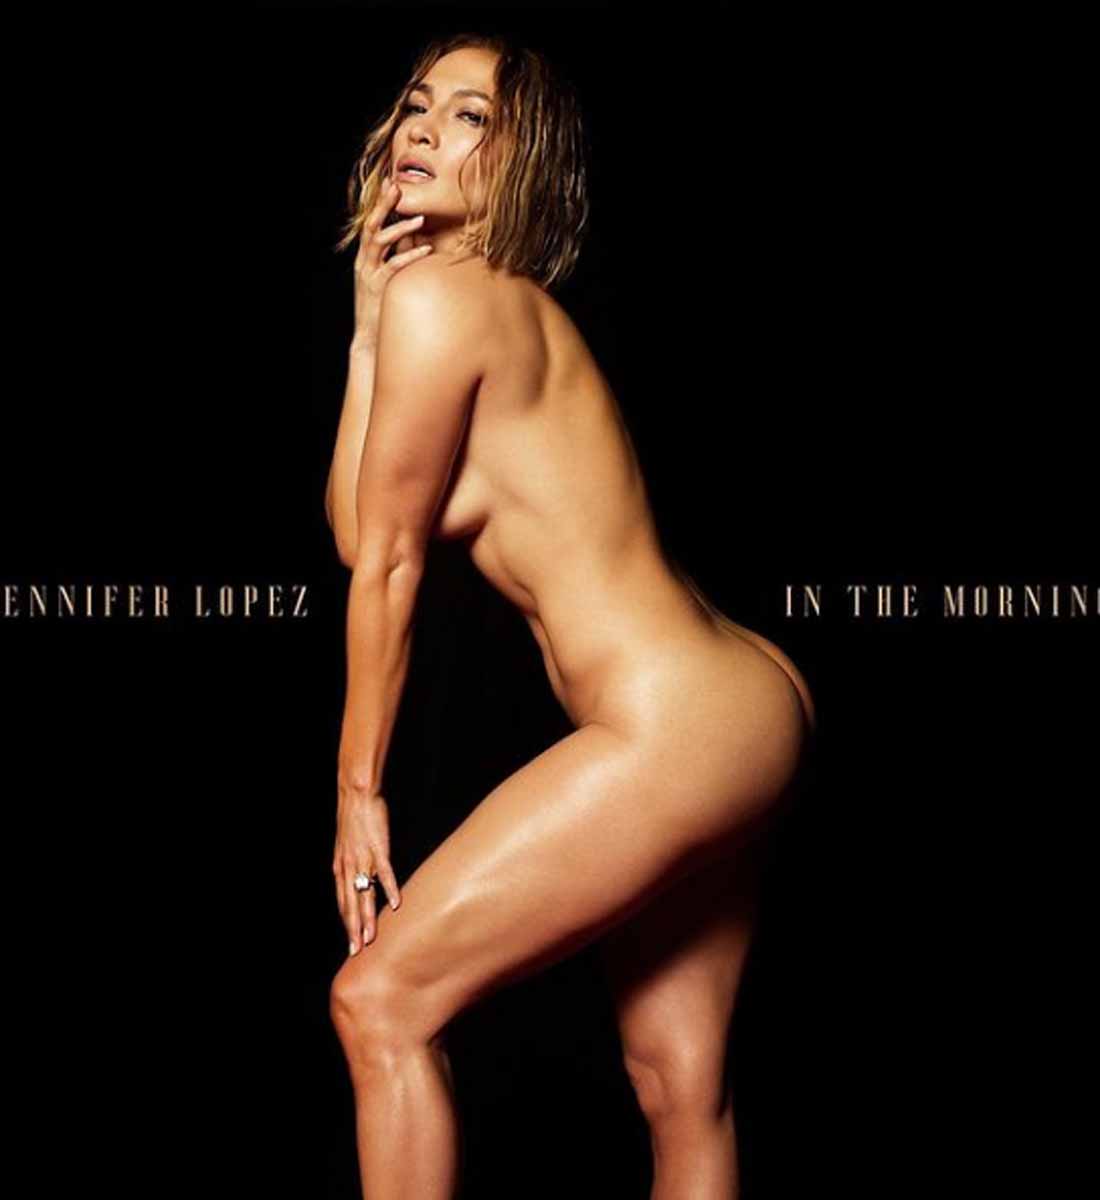 Finally, Jennifer Lopez is a woman and a body - Naked for her new single 1